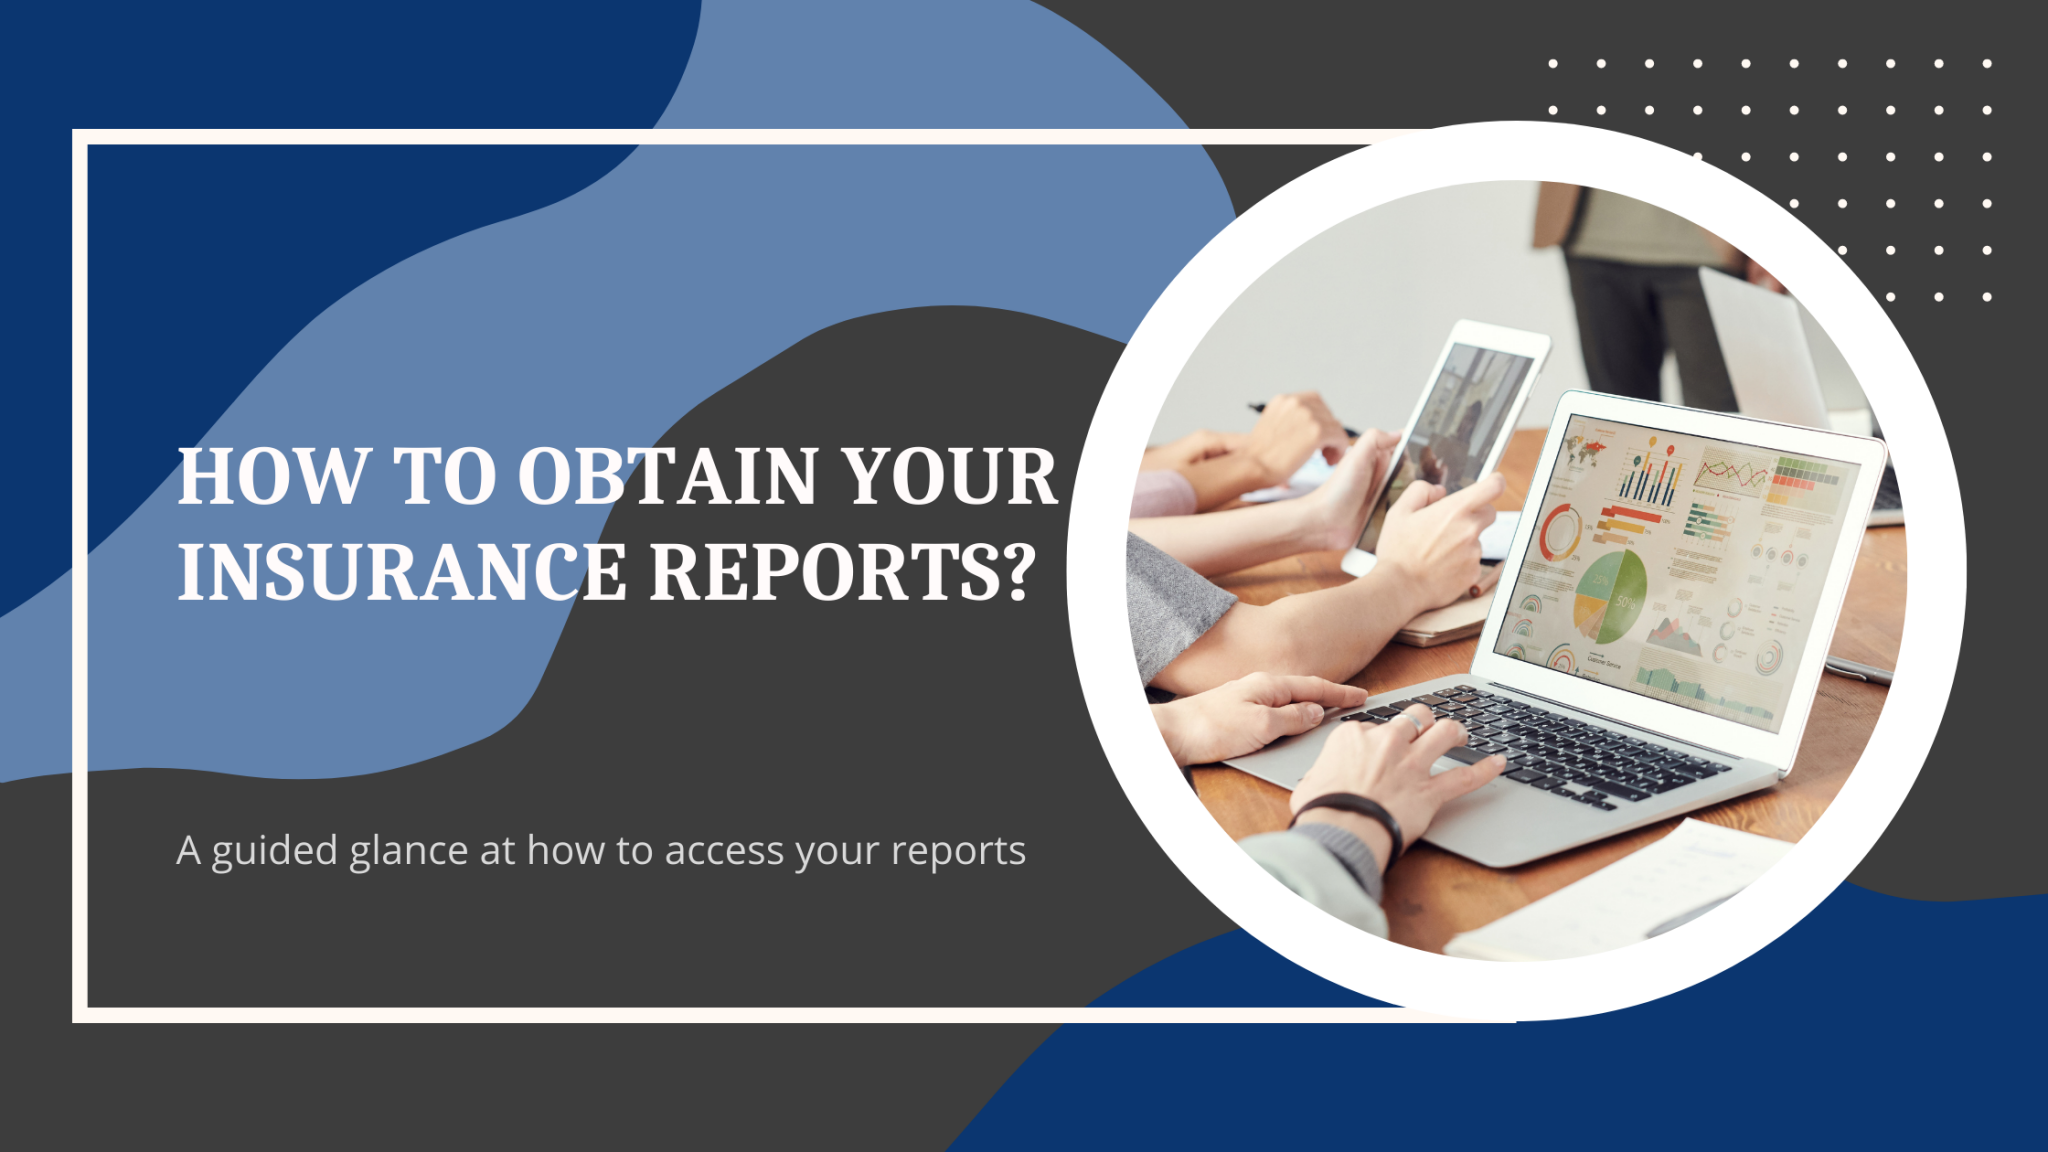 How to Obtain Your Insurance Reports